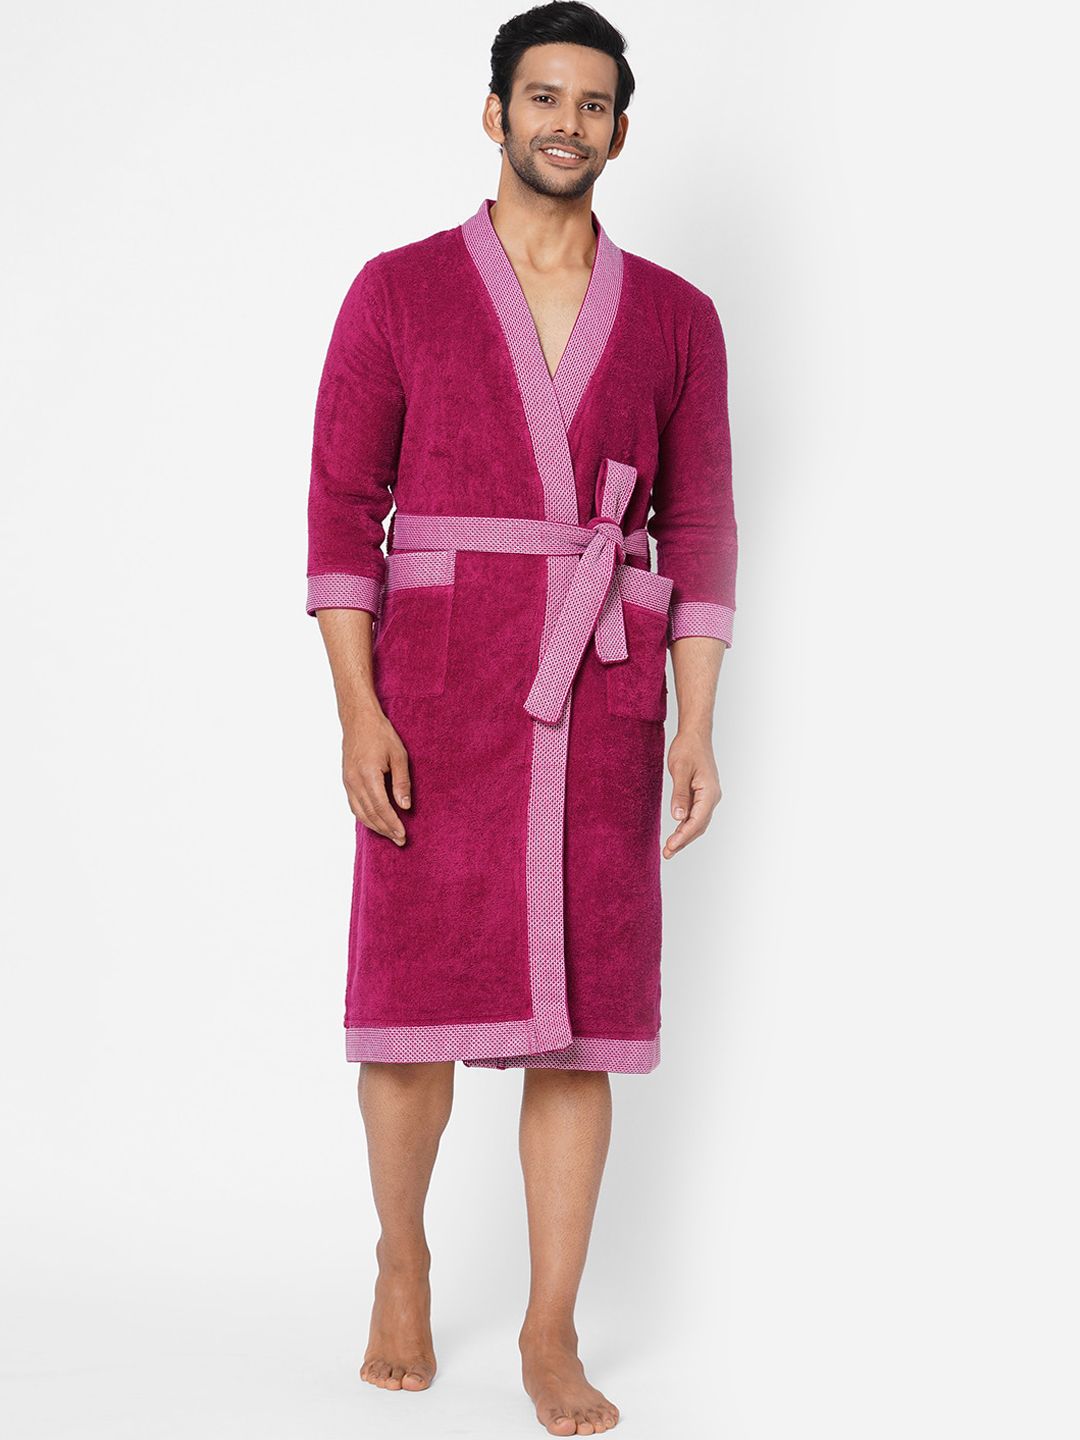 SPACES Burgundy Solid Pure Cotton 400 GSM Bathrobe Price in India